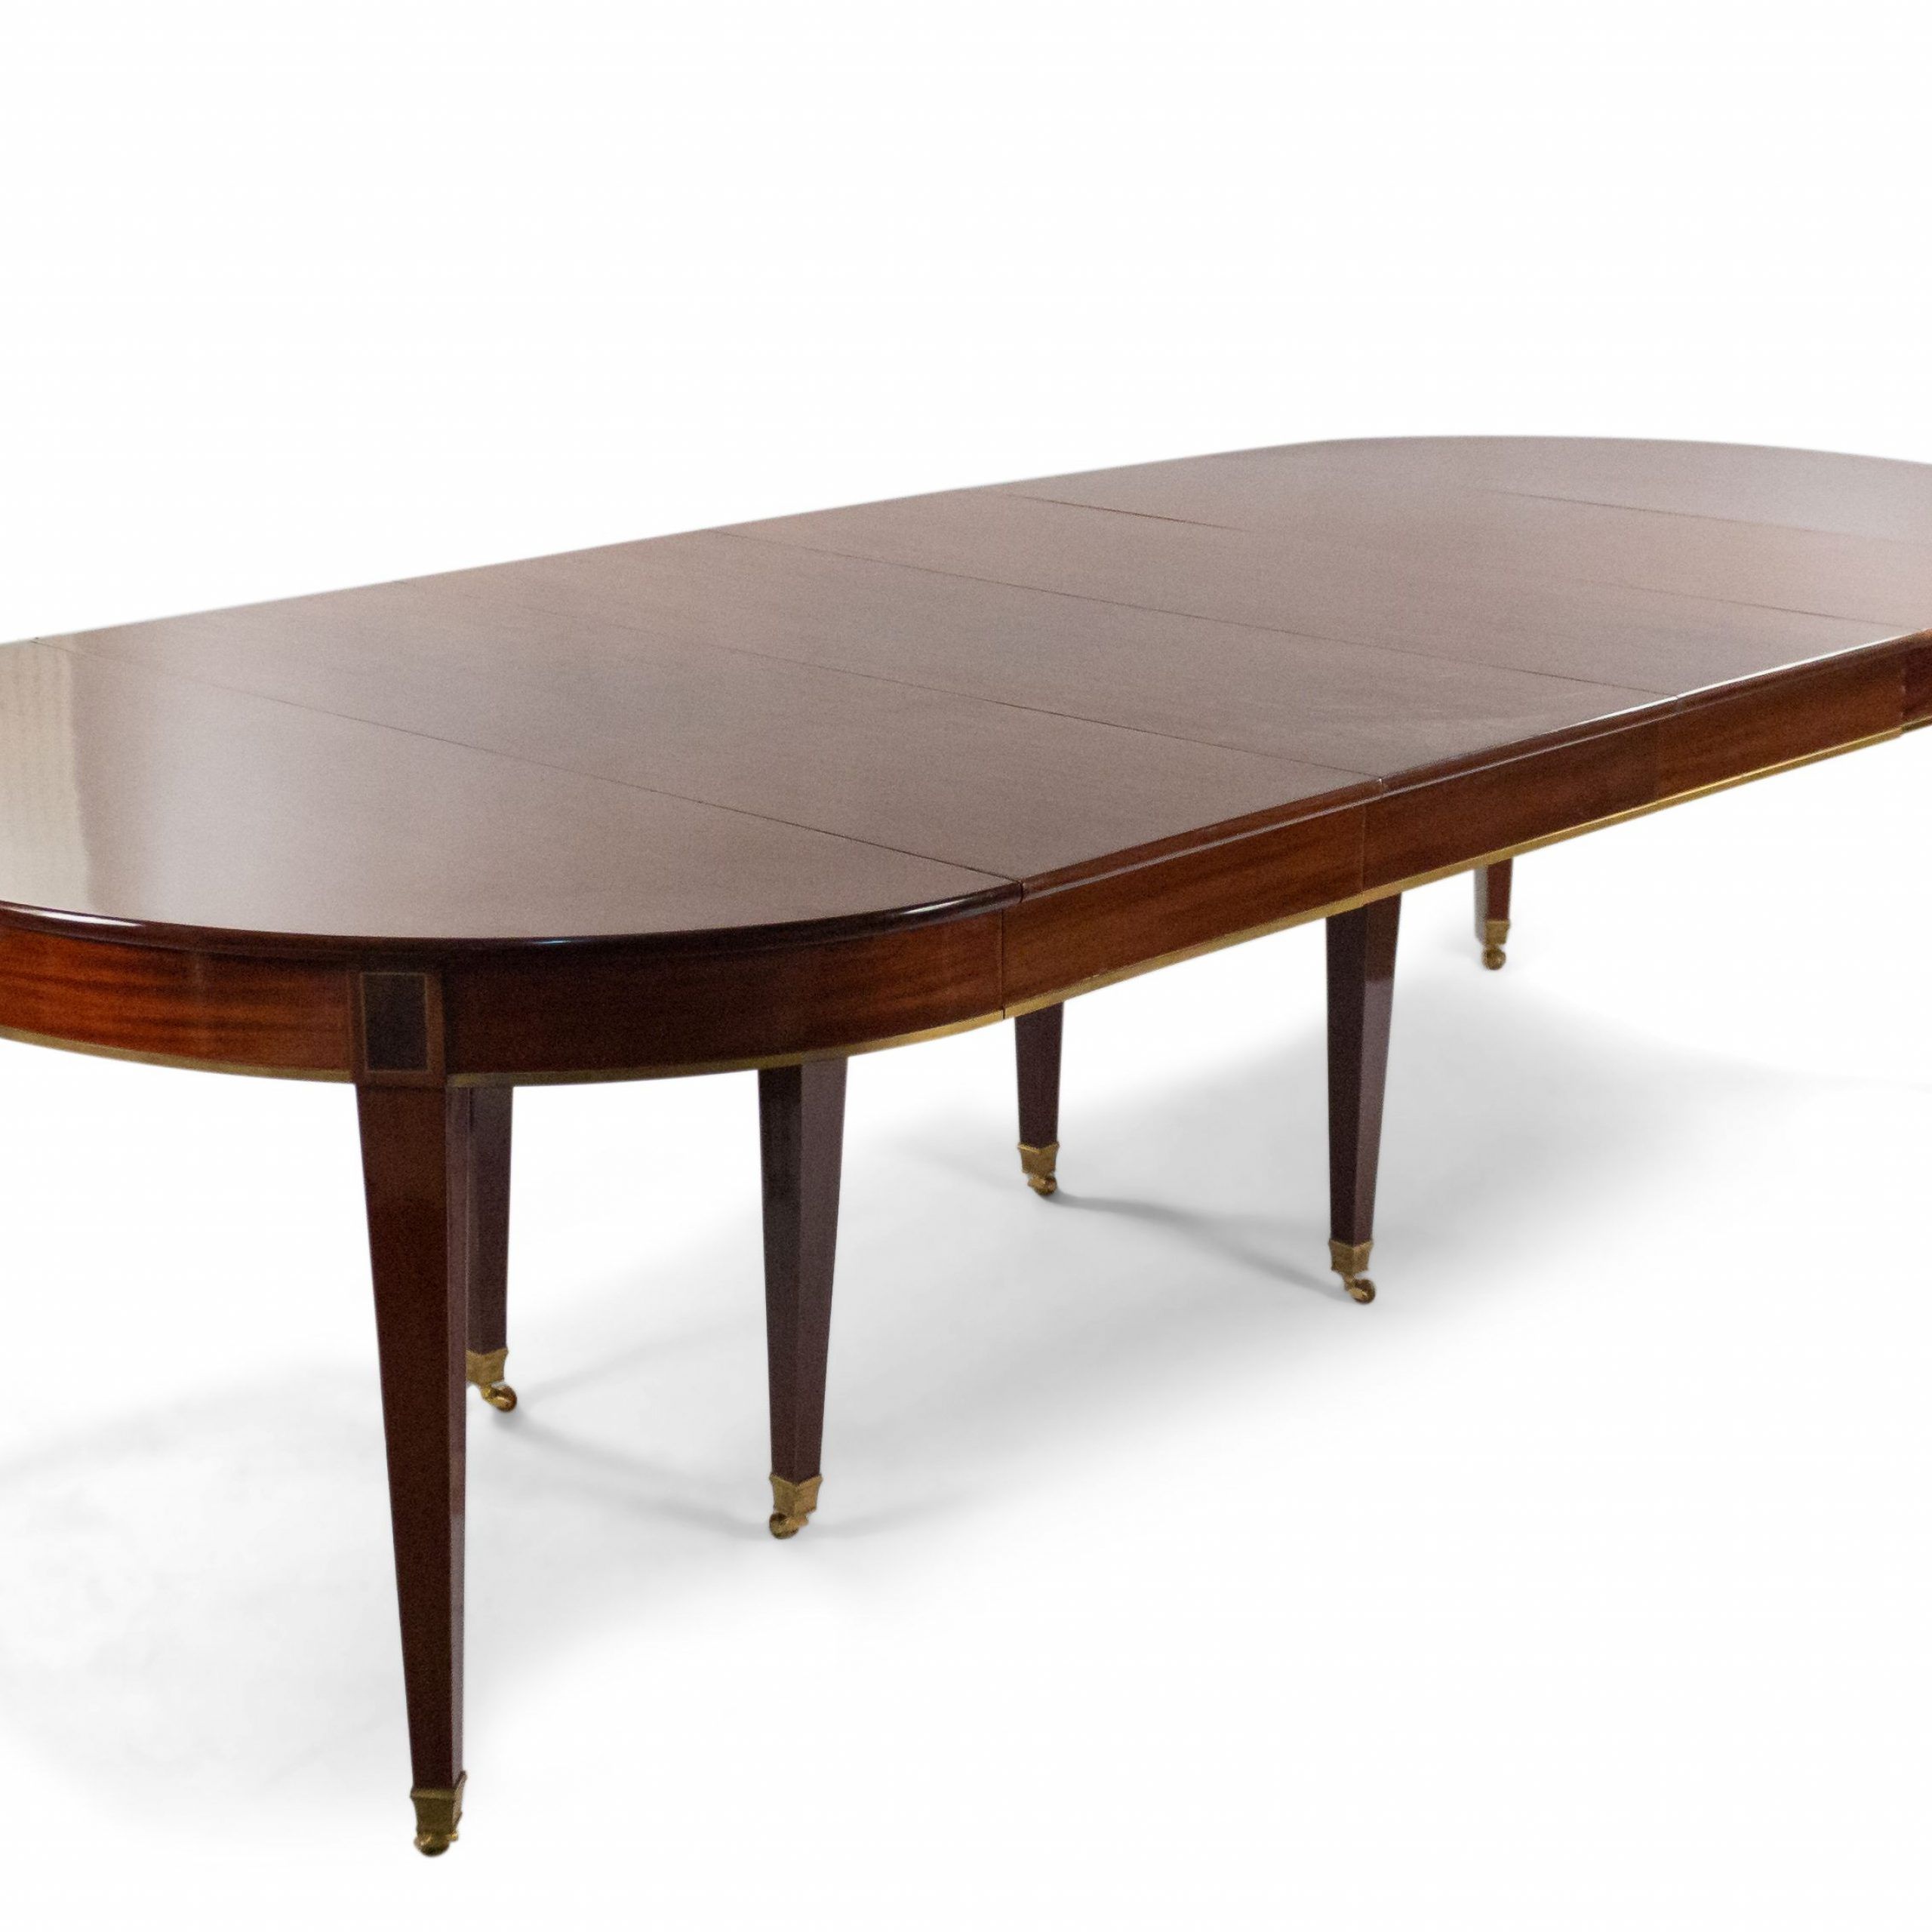 Russian Neoclassic Mahogany Dining Table | Newel With Regard To Most Current Rustic Mahogany Extending Dining Tables (View 19 of 25)